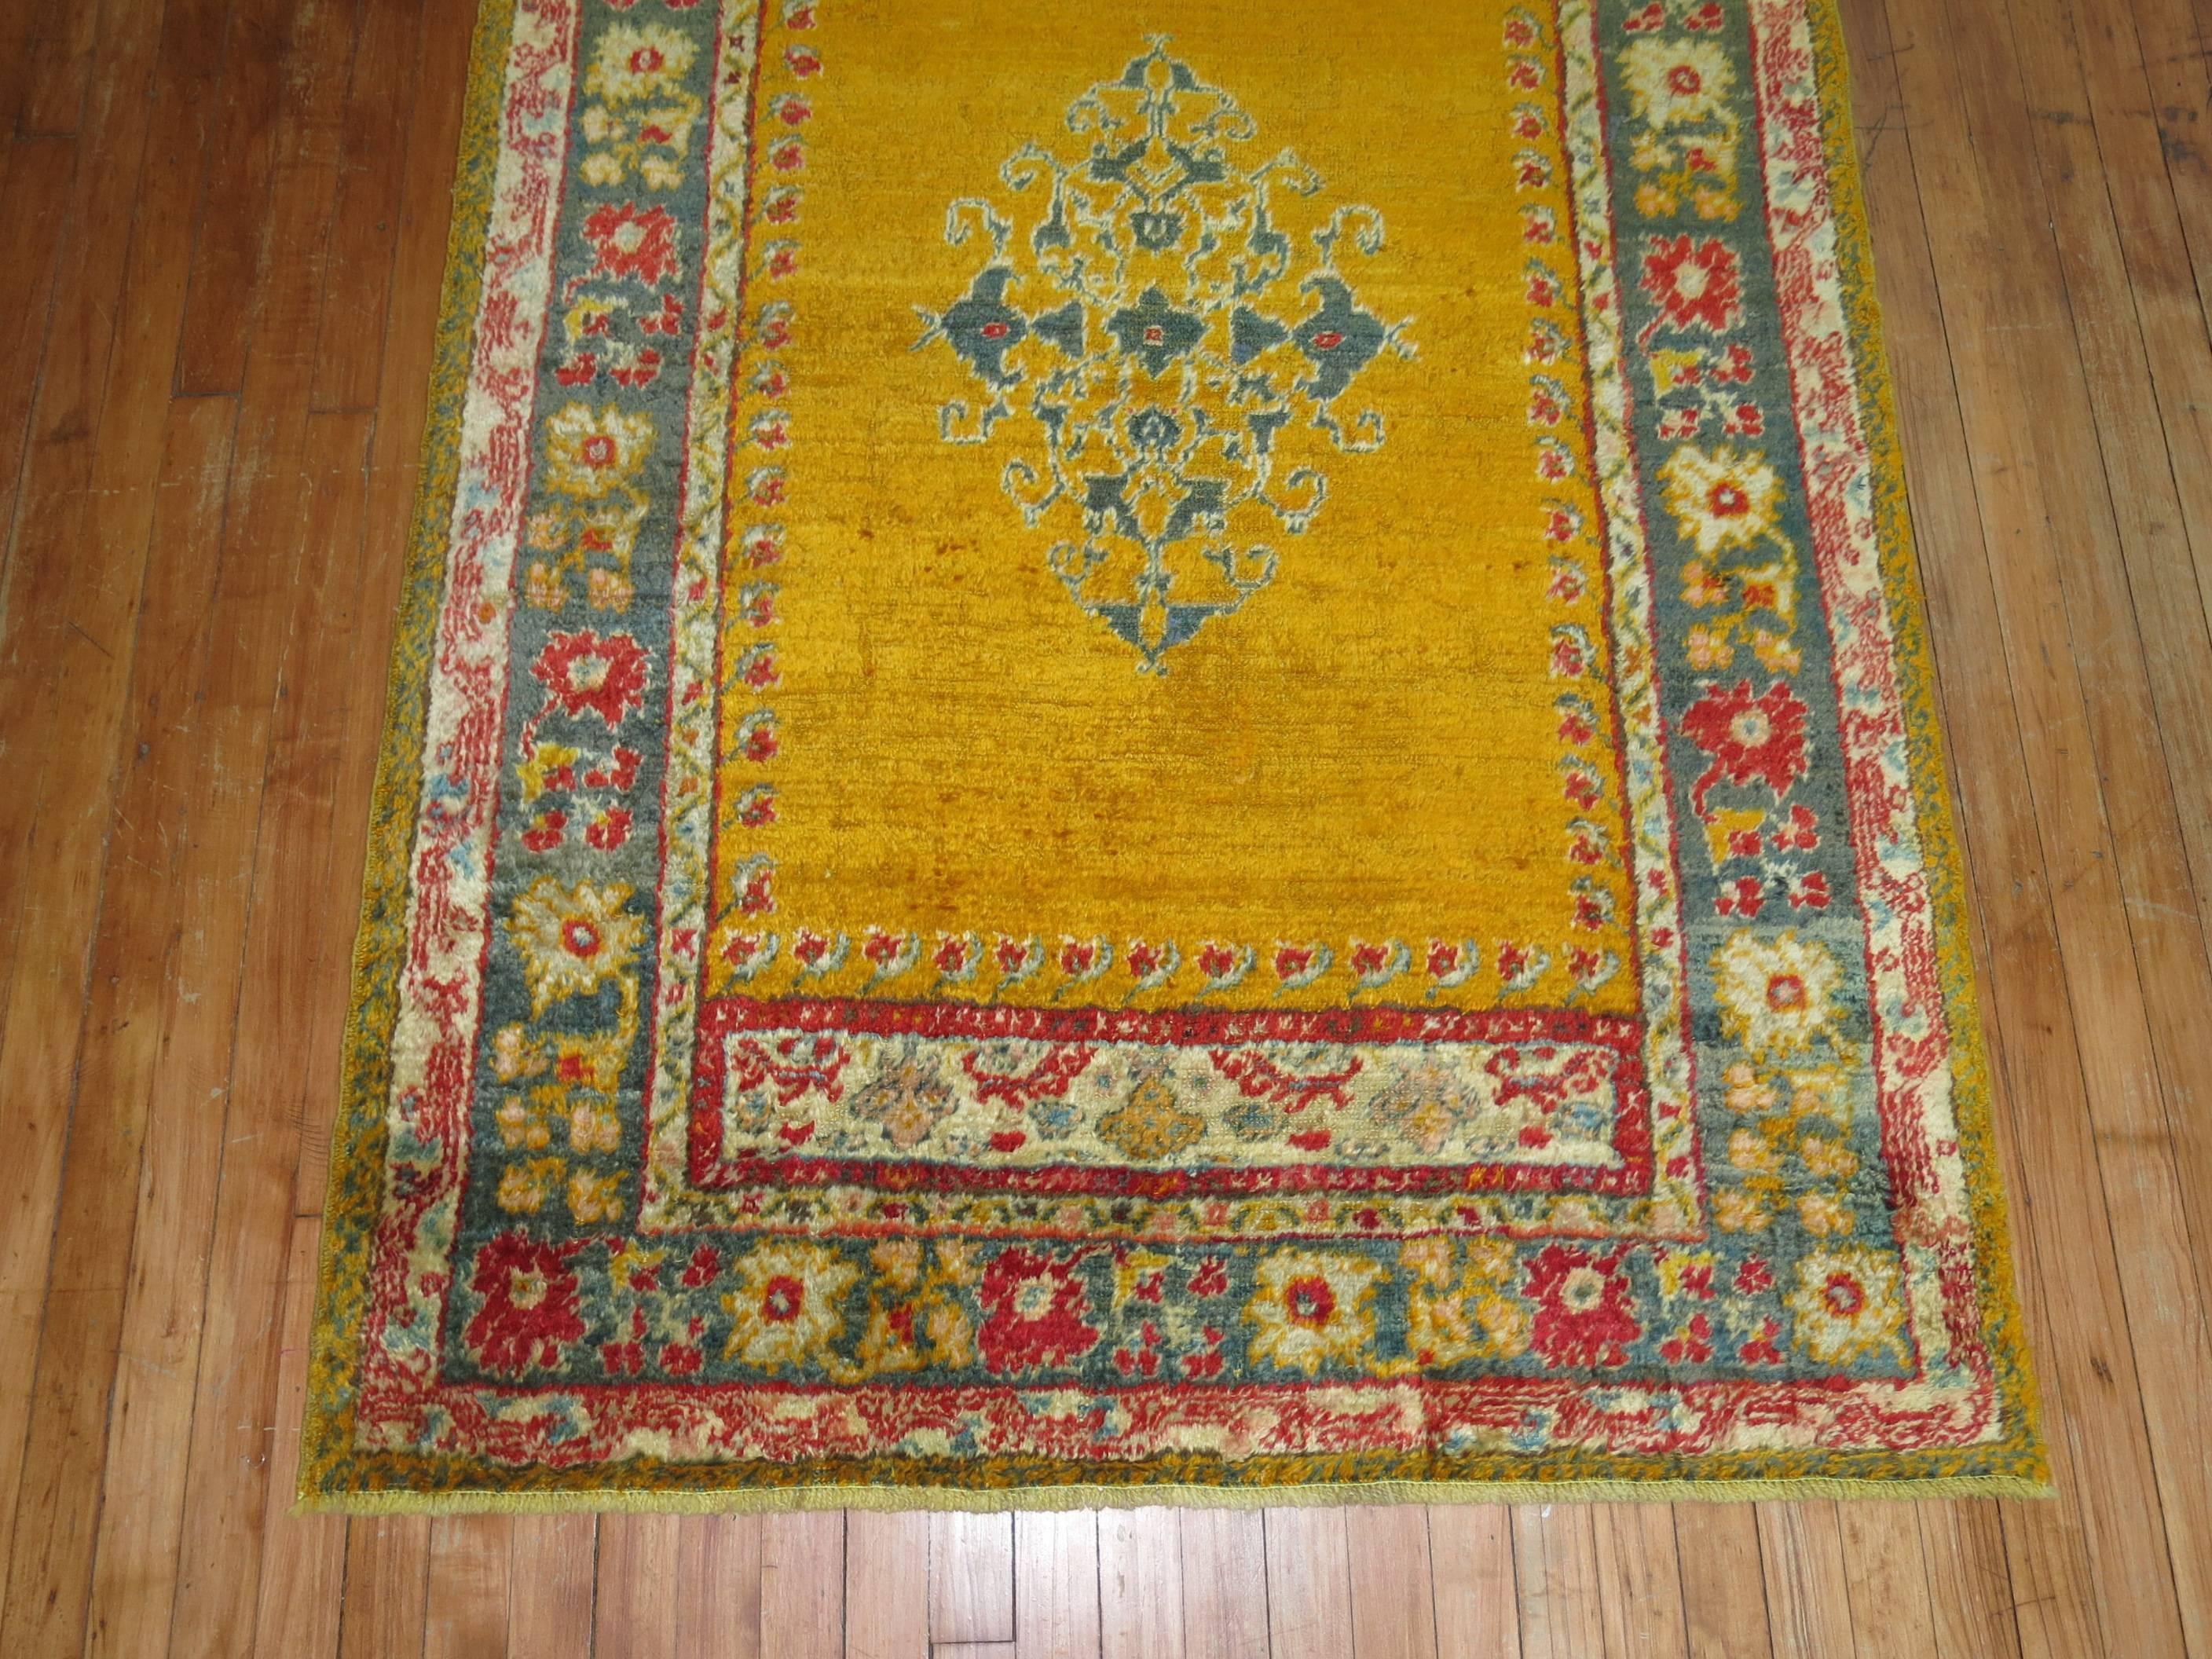 An early 20th century angora wool Oushak rug with a saffron gold colored ground on an open field and center medallion.

4'1'' x 6'3''